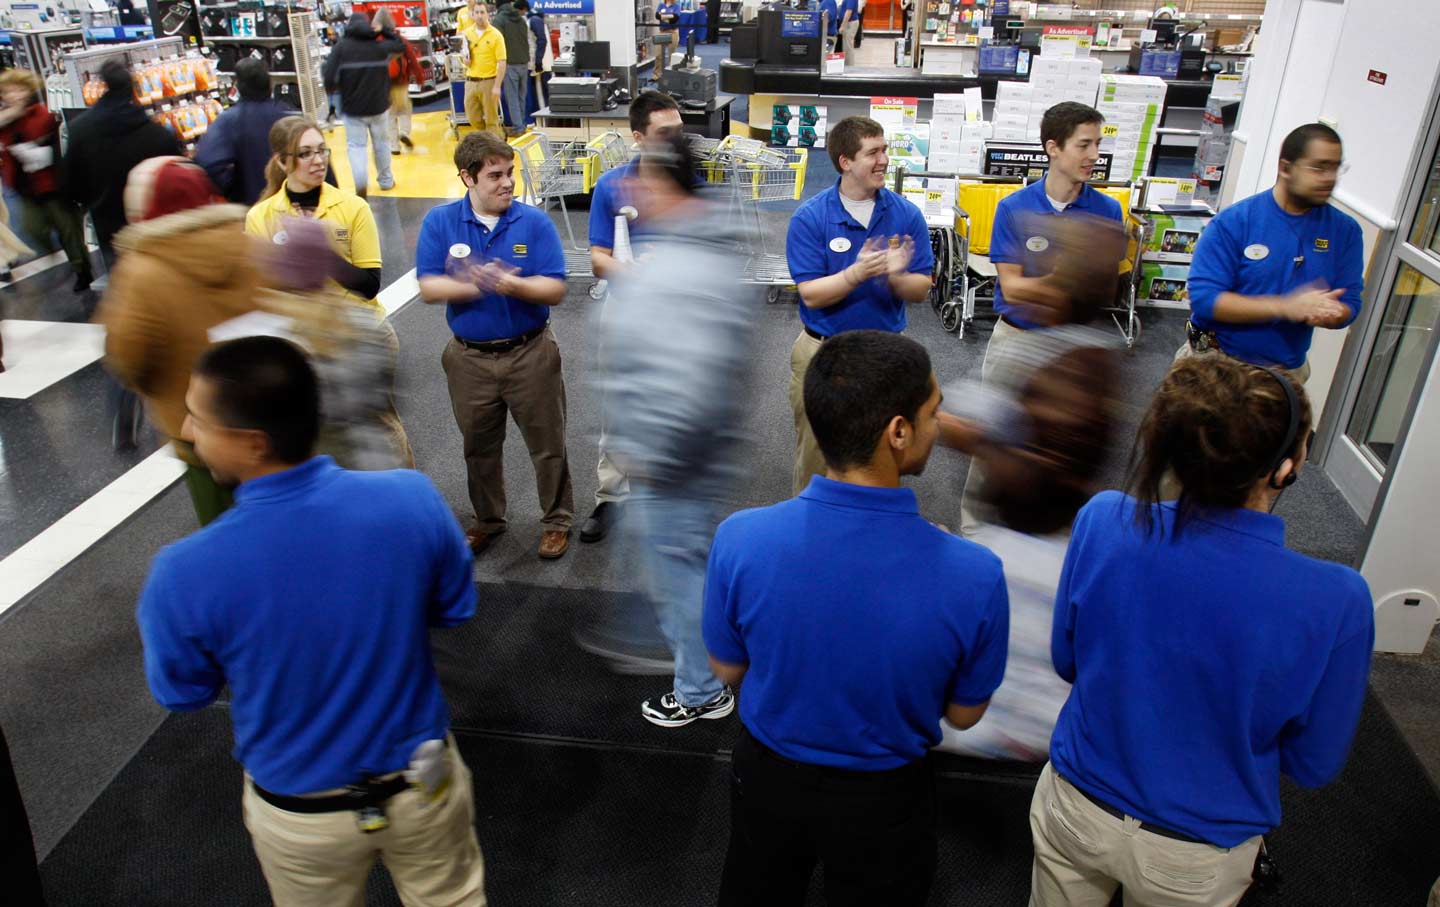 Retail Jobs Don’t Have to Be Awful | The Nation